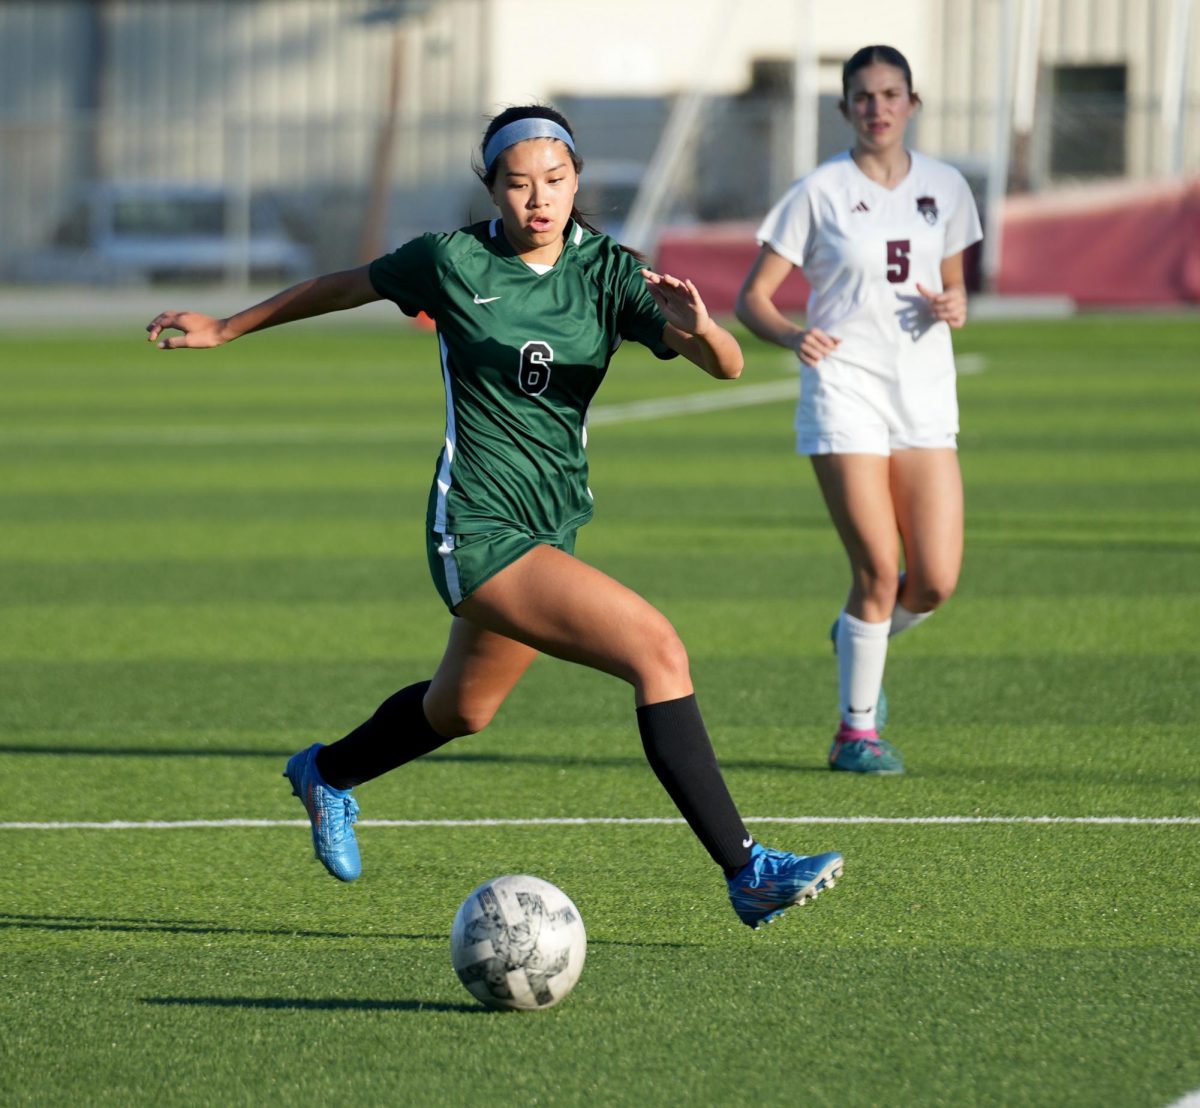 Senior defender Sienna Morales dribbles the ball up the field against Whitehouse on March 26. Morales has been on varsity since she was a sophomore.